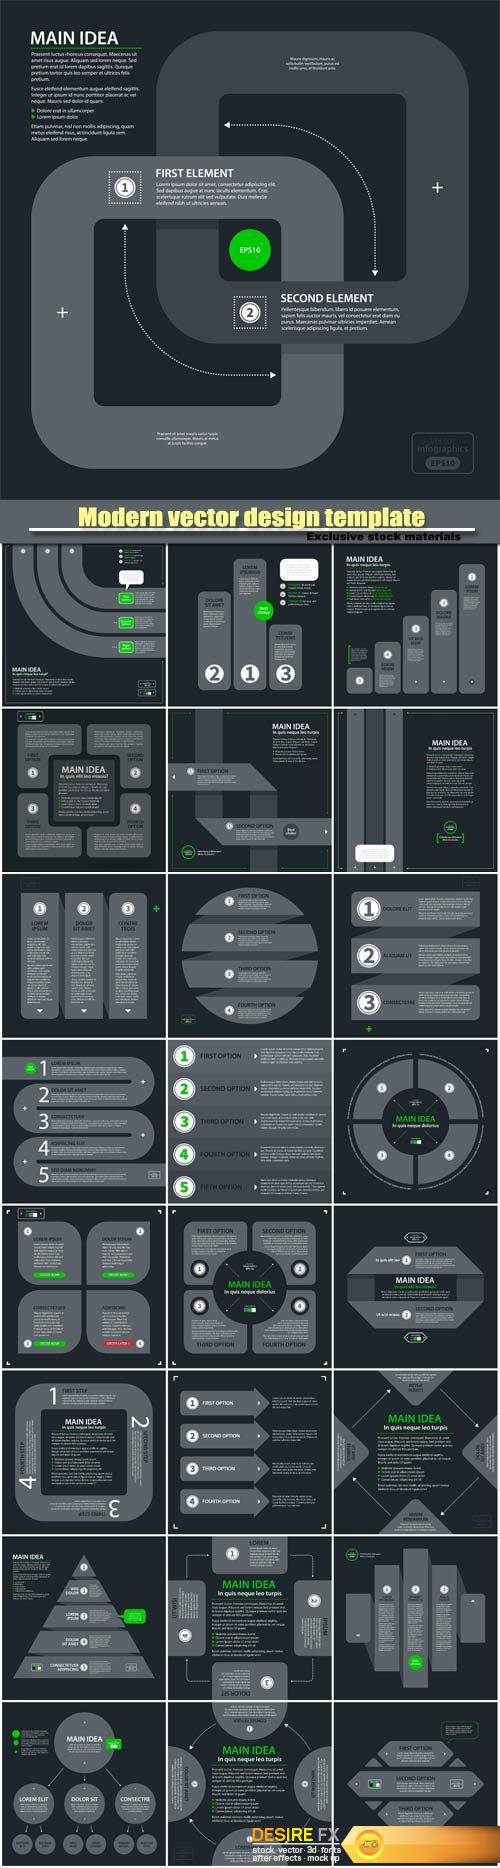 Modern vector design template with four arrows and options in flat style on dark gray background